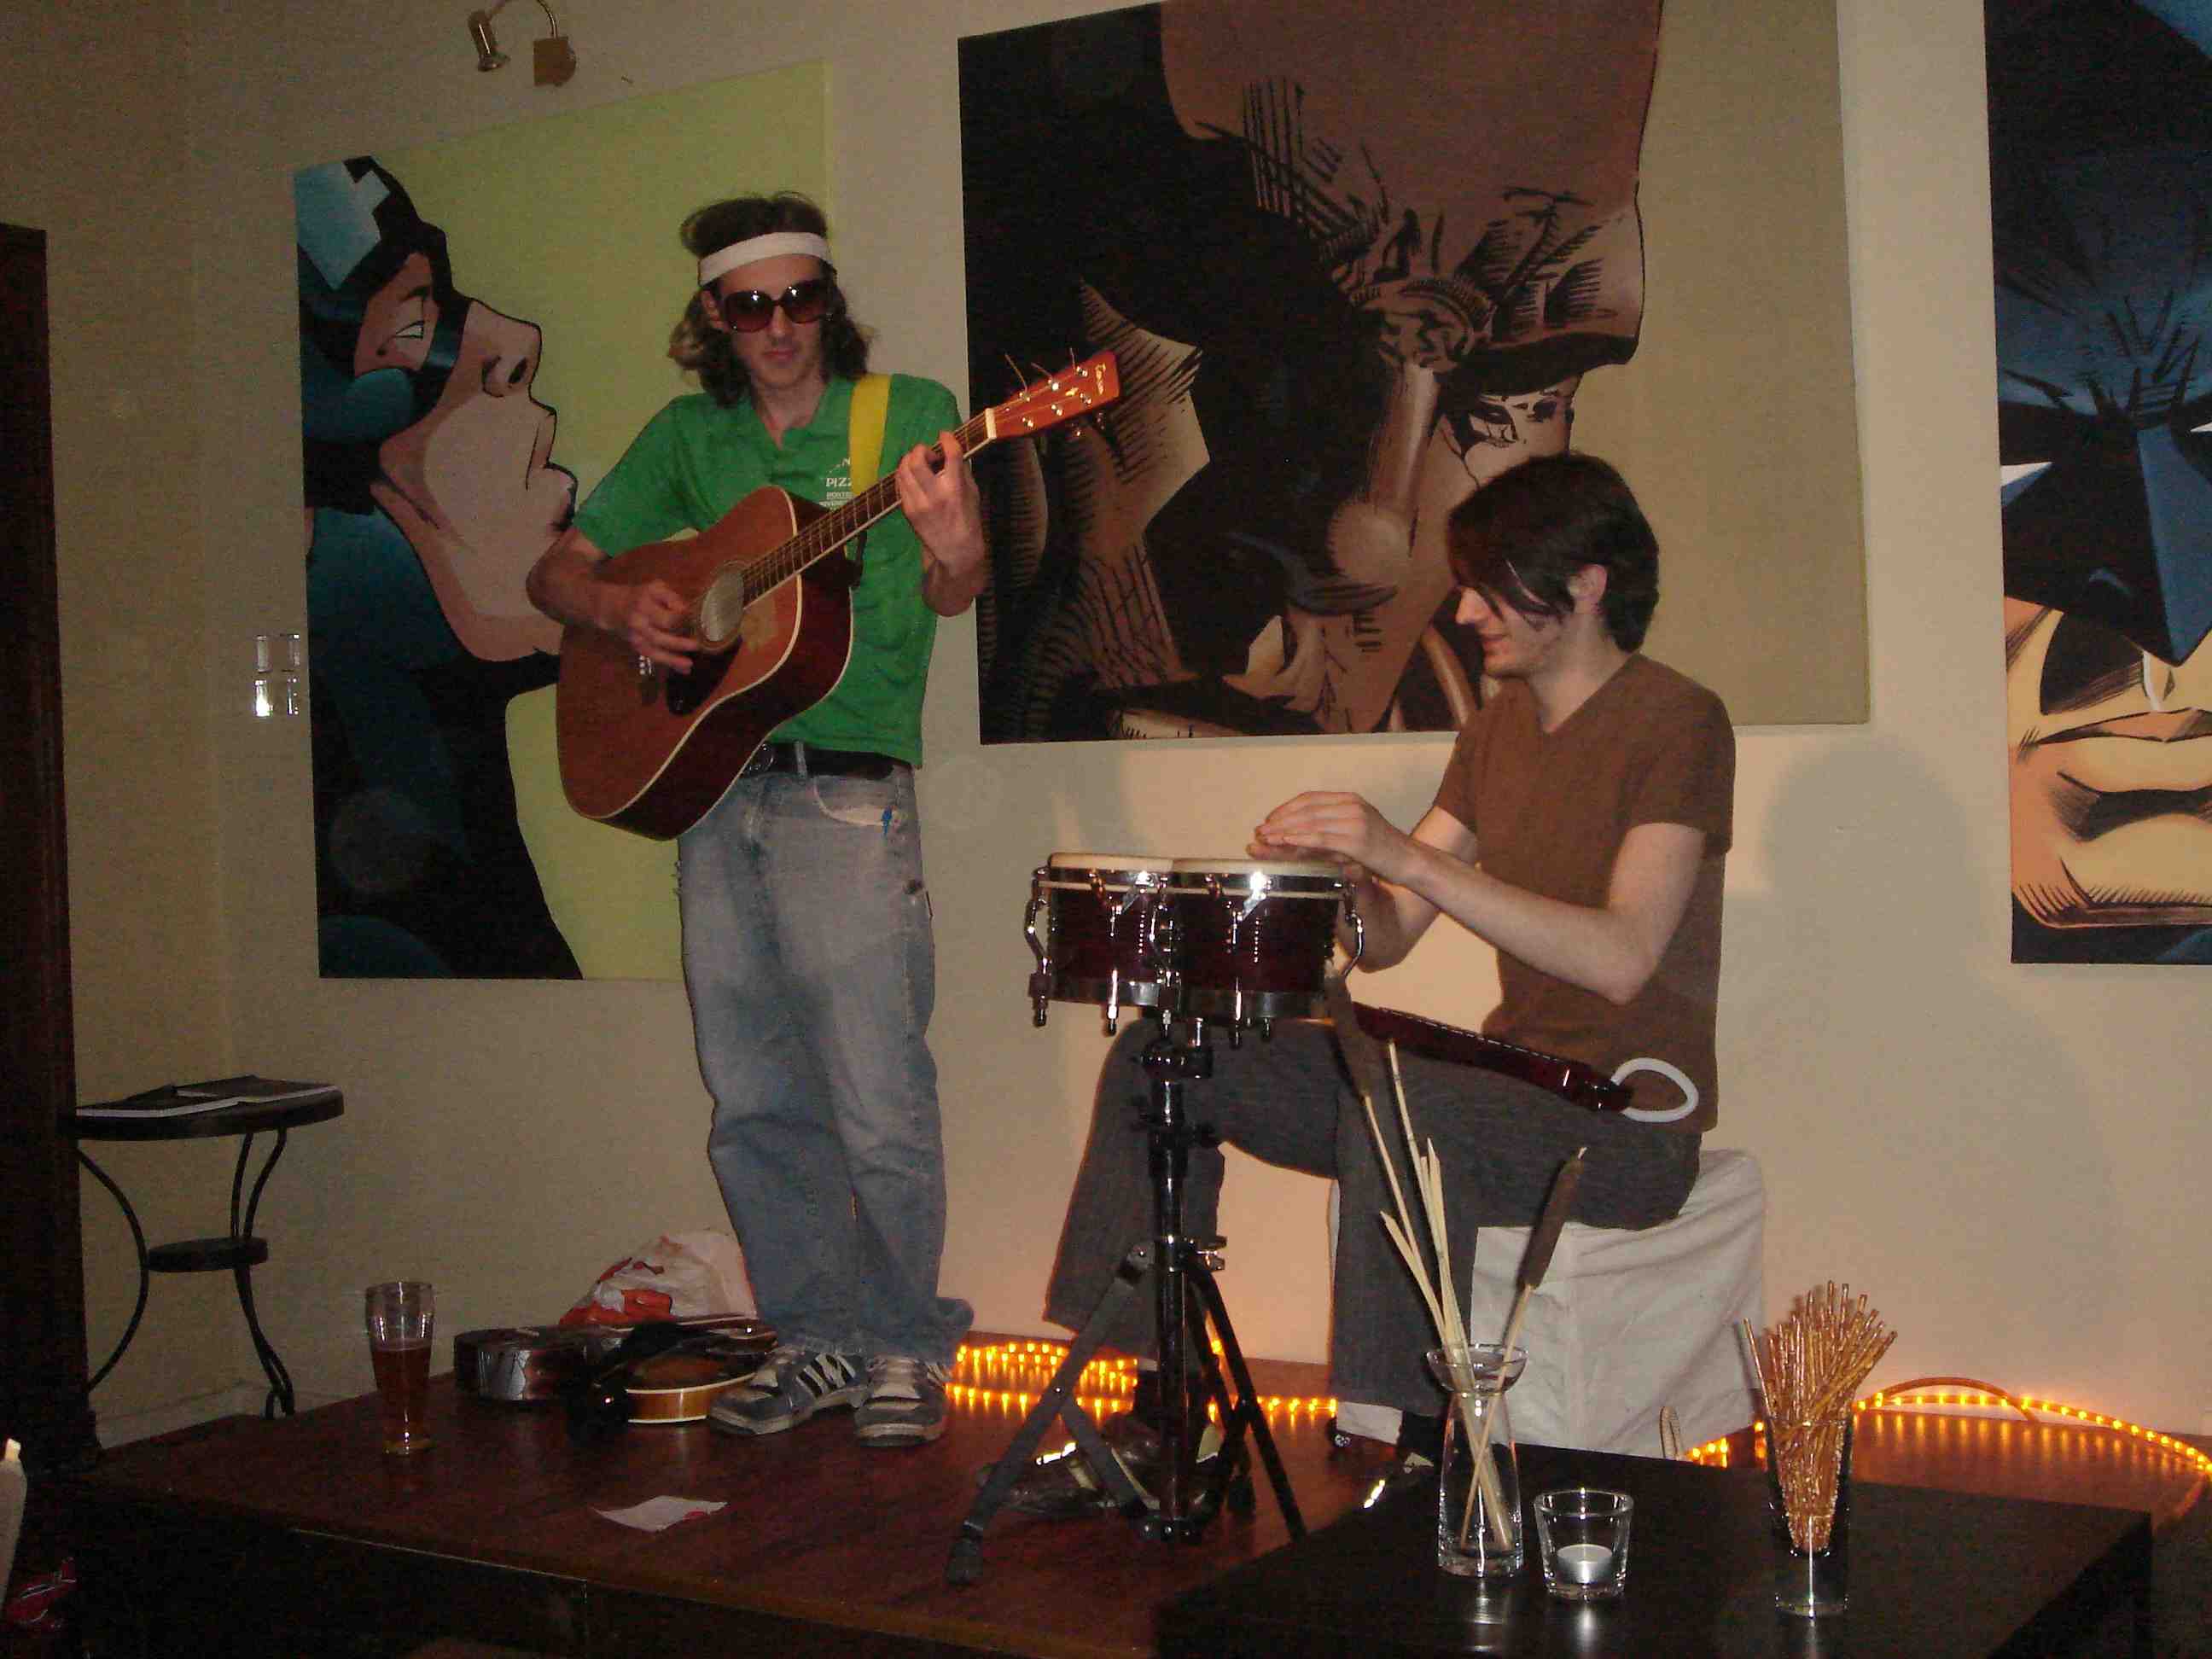 Two guys playing music on a tiny stage in front of somewhat homoerotic paintings of superheros